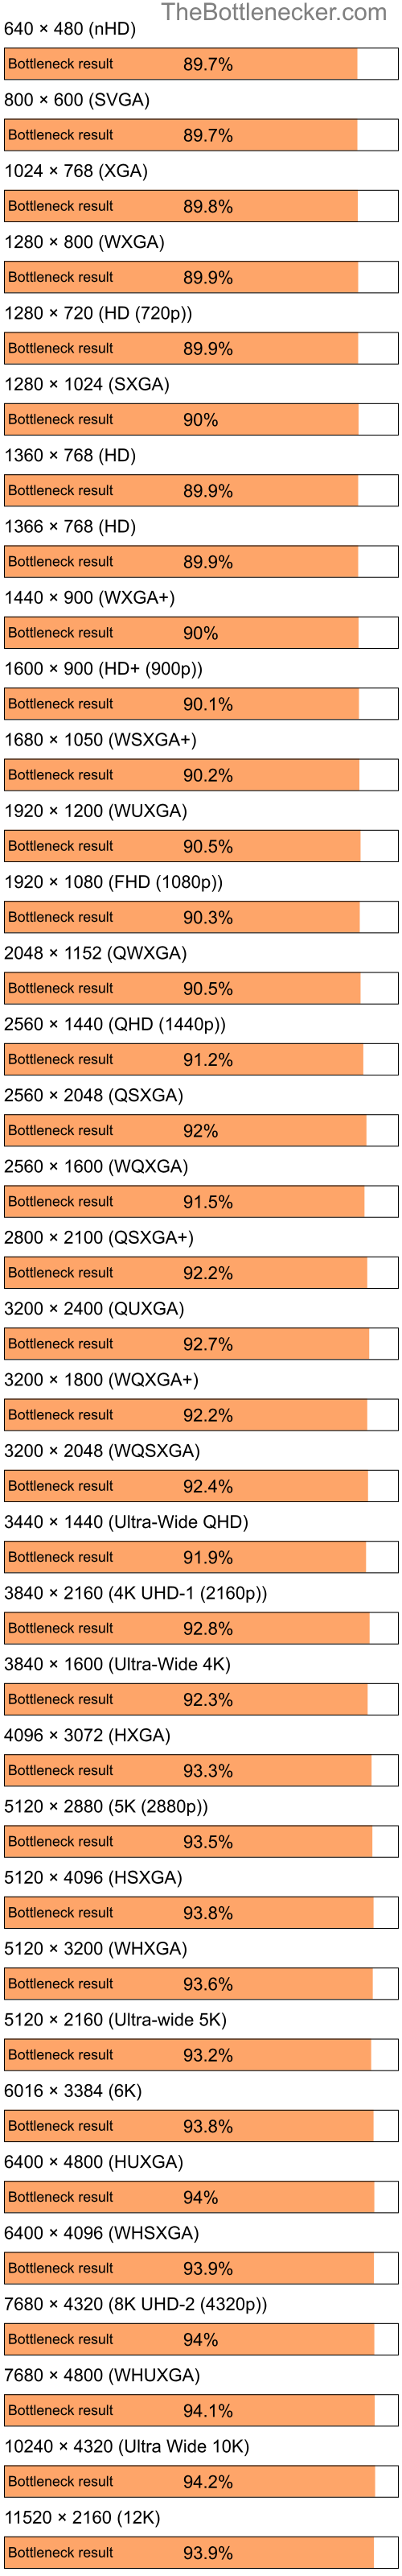 Bottleneck results by resolution for Intel Atom Z520 and AMD Mobility Radeon 9000 IGP in Graphic Card Intense Tasks